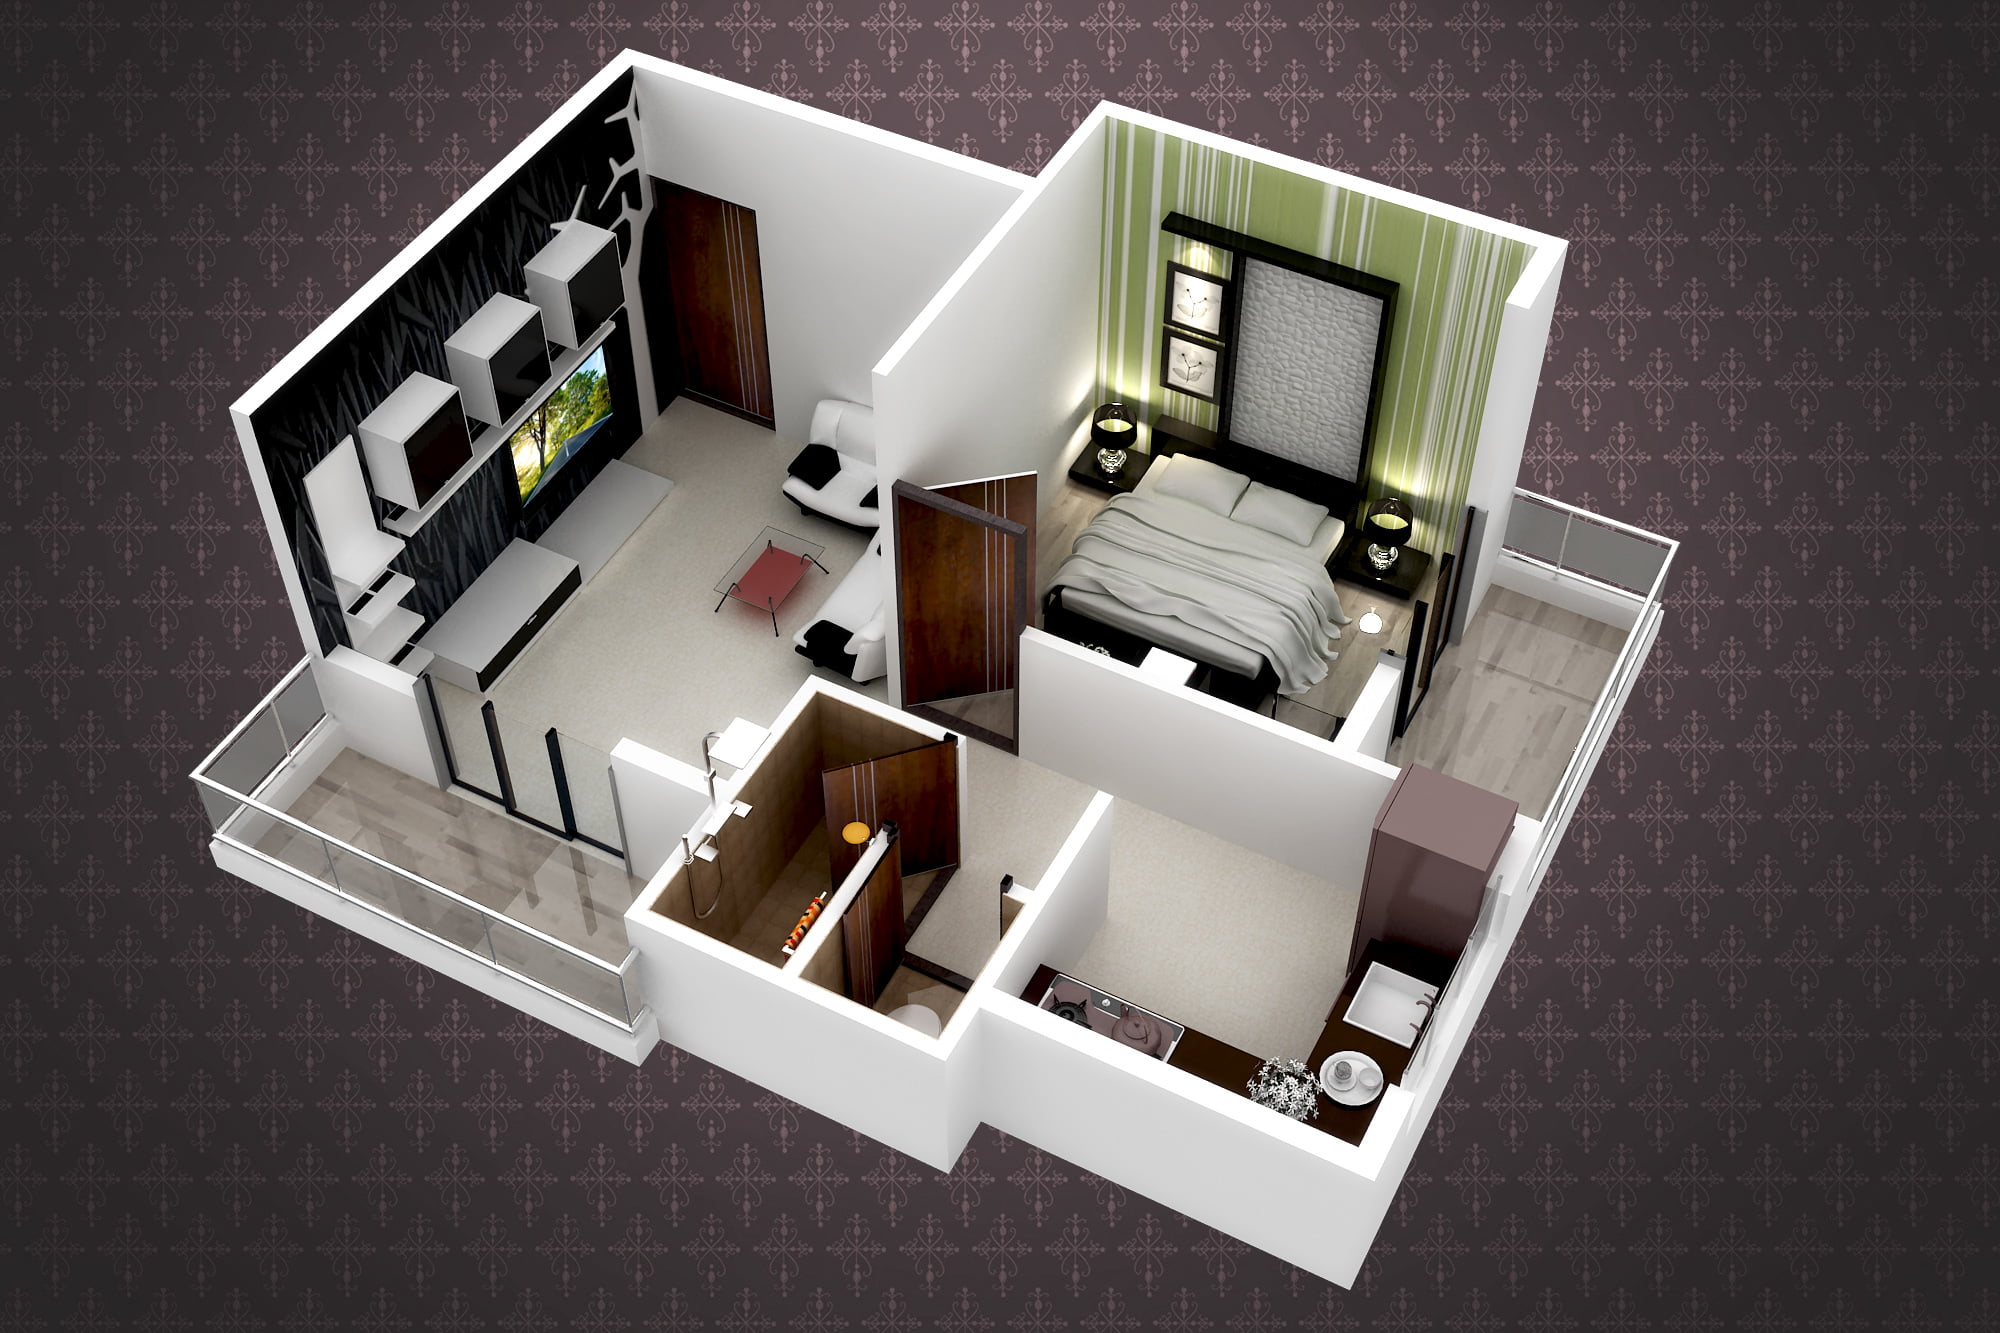 10 Simple 1 BHK House Plan Ideas For Indian Homes | The House Design Hub